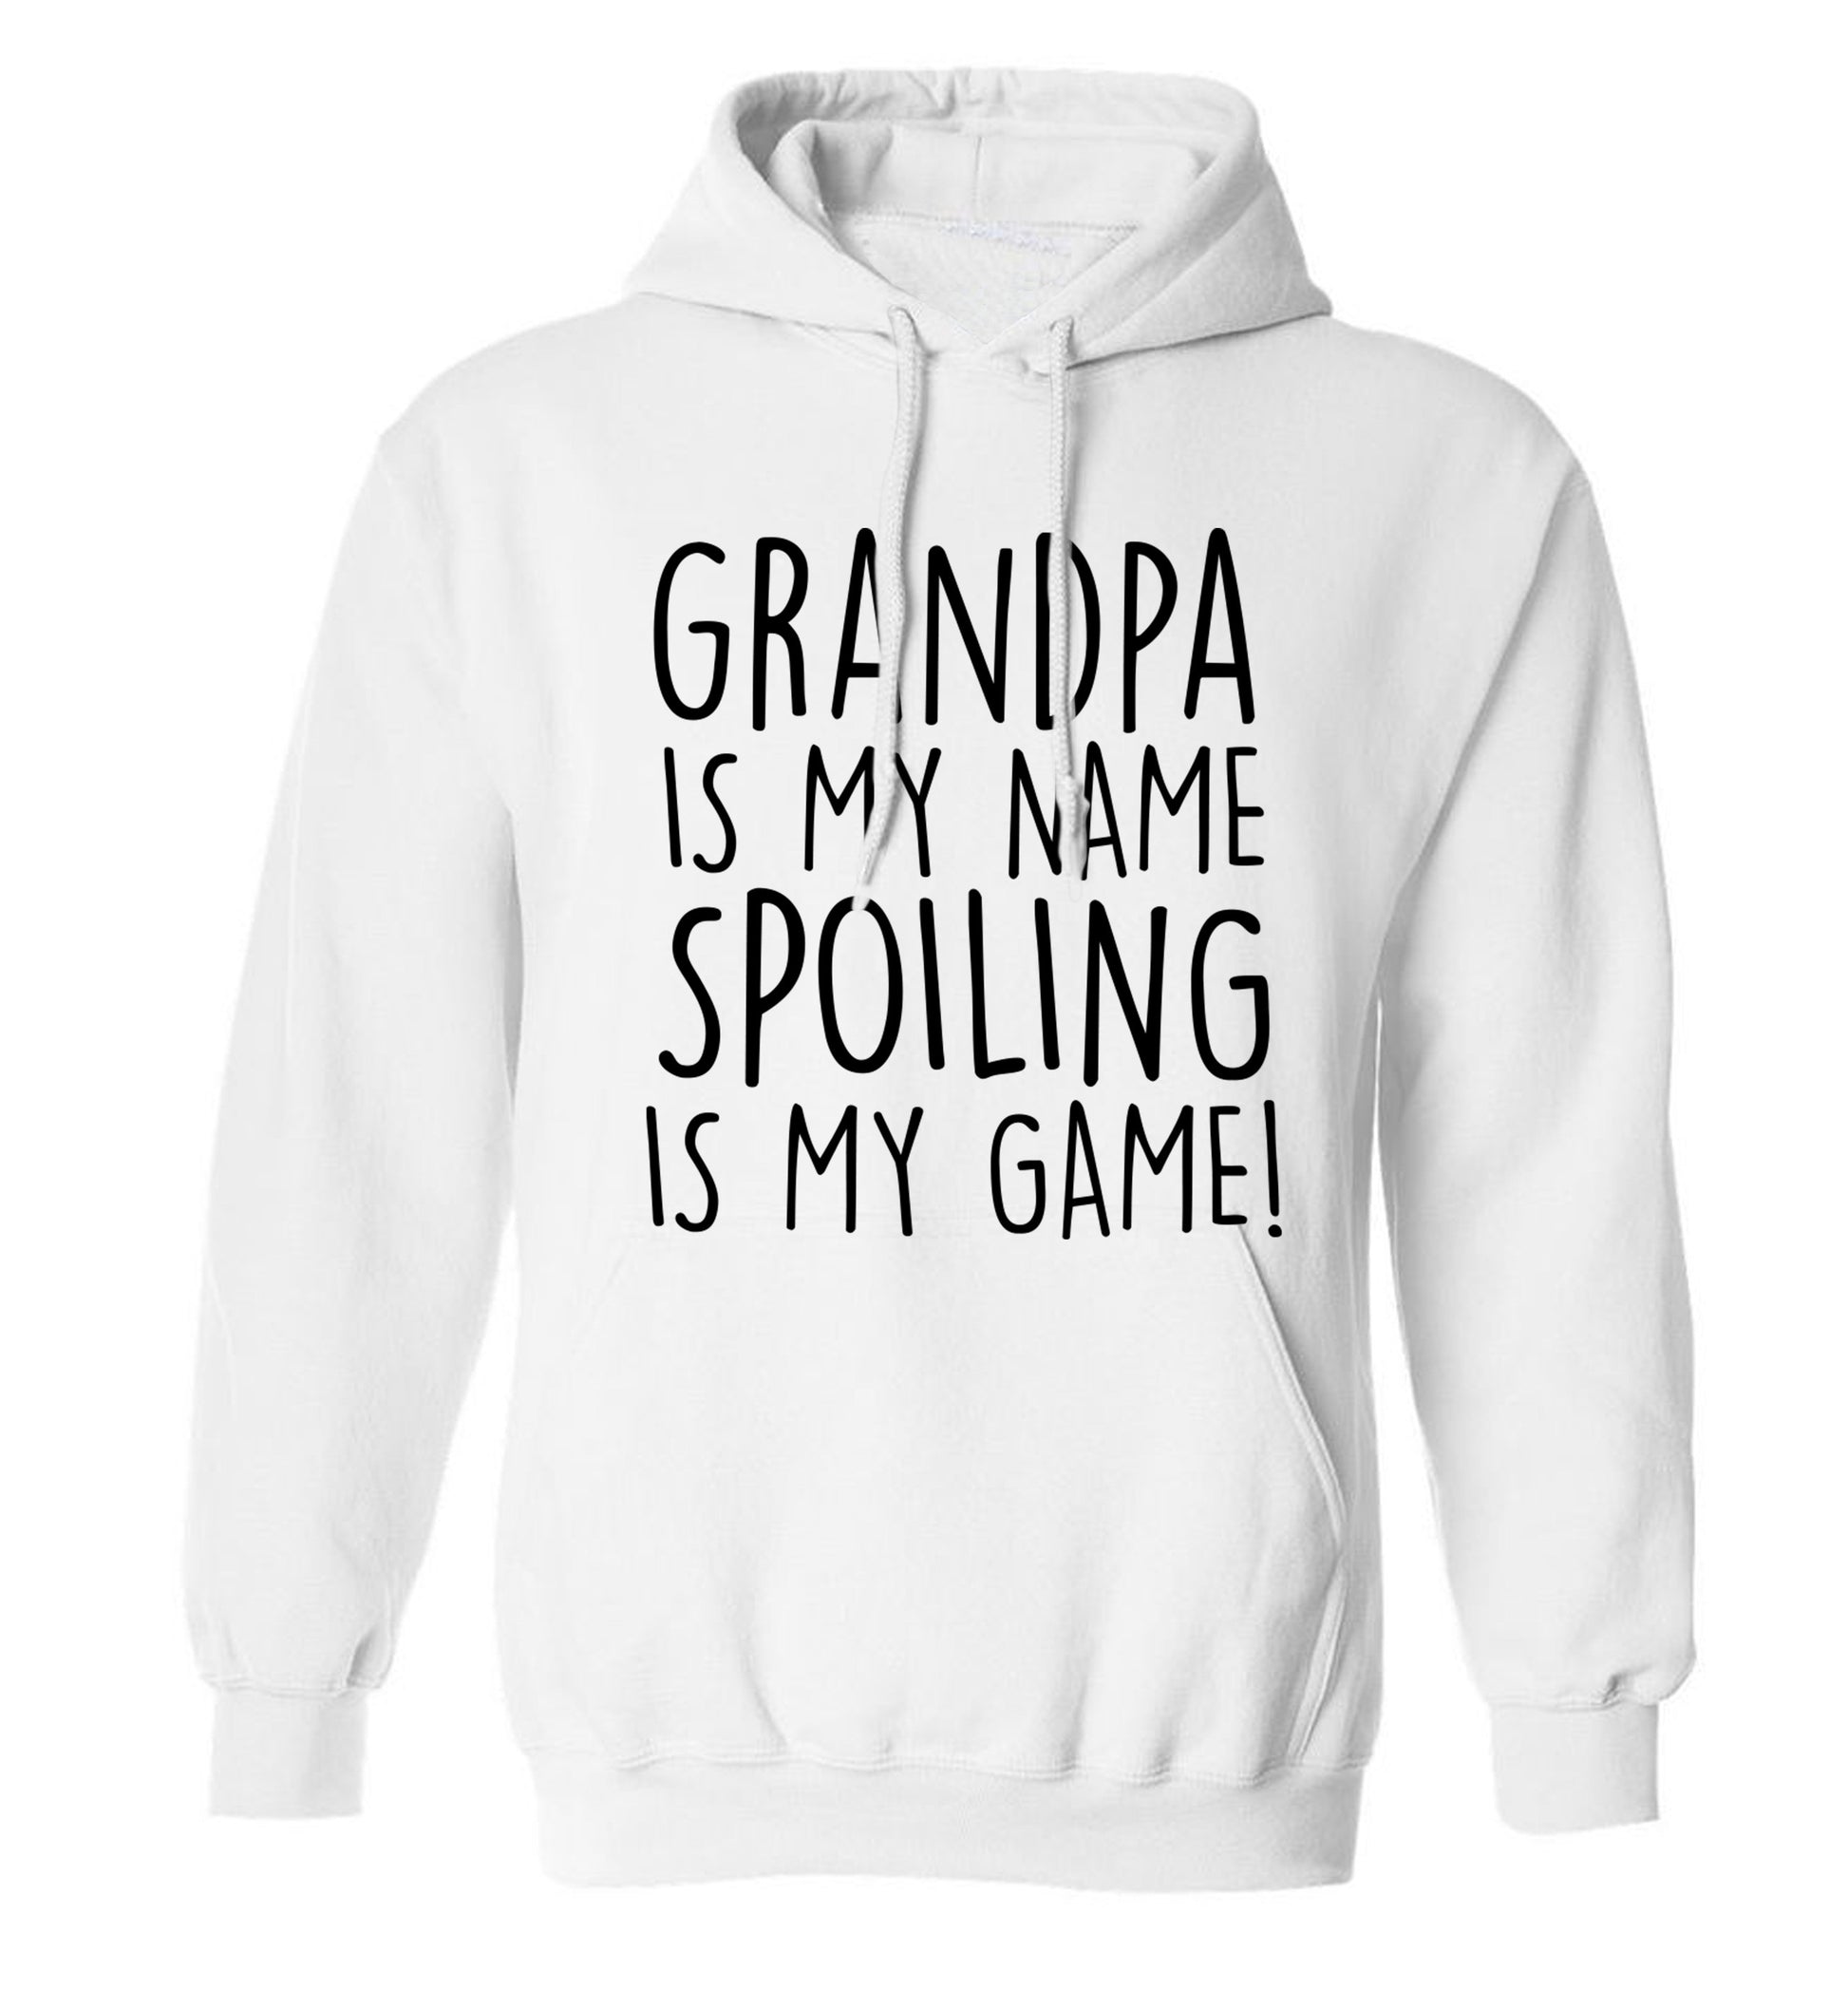 Grandpa is my name, spoiling is my game adults unisex white hoodie 2XL